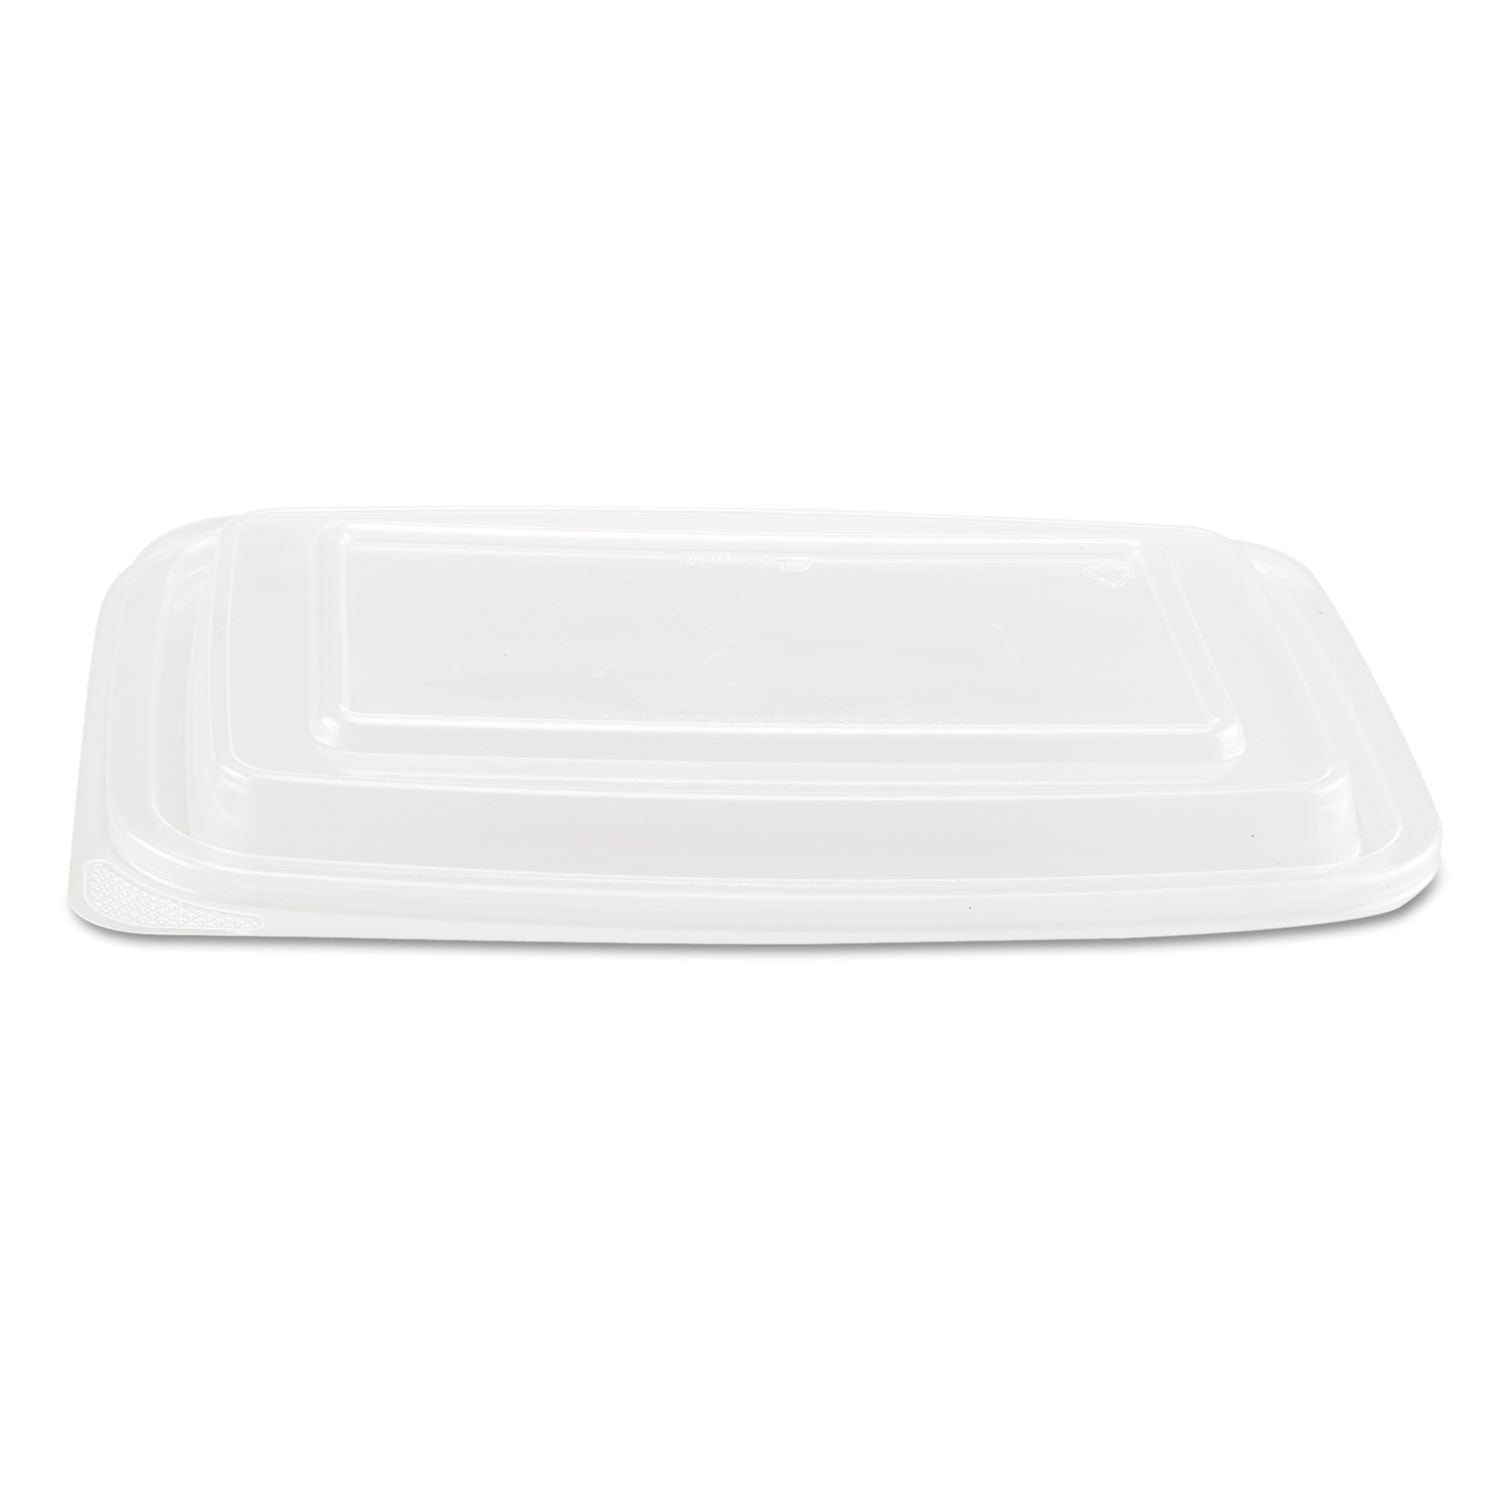 Microwave Safe Container Lid, Fits 24-32 oz, Rectangular, Clear, Plastic, 75/Bag, 4 Bags/Carton - 